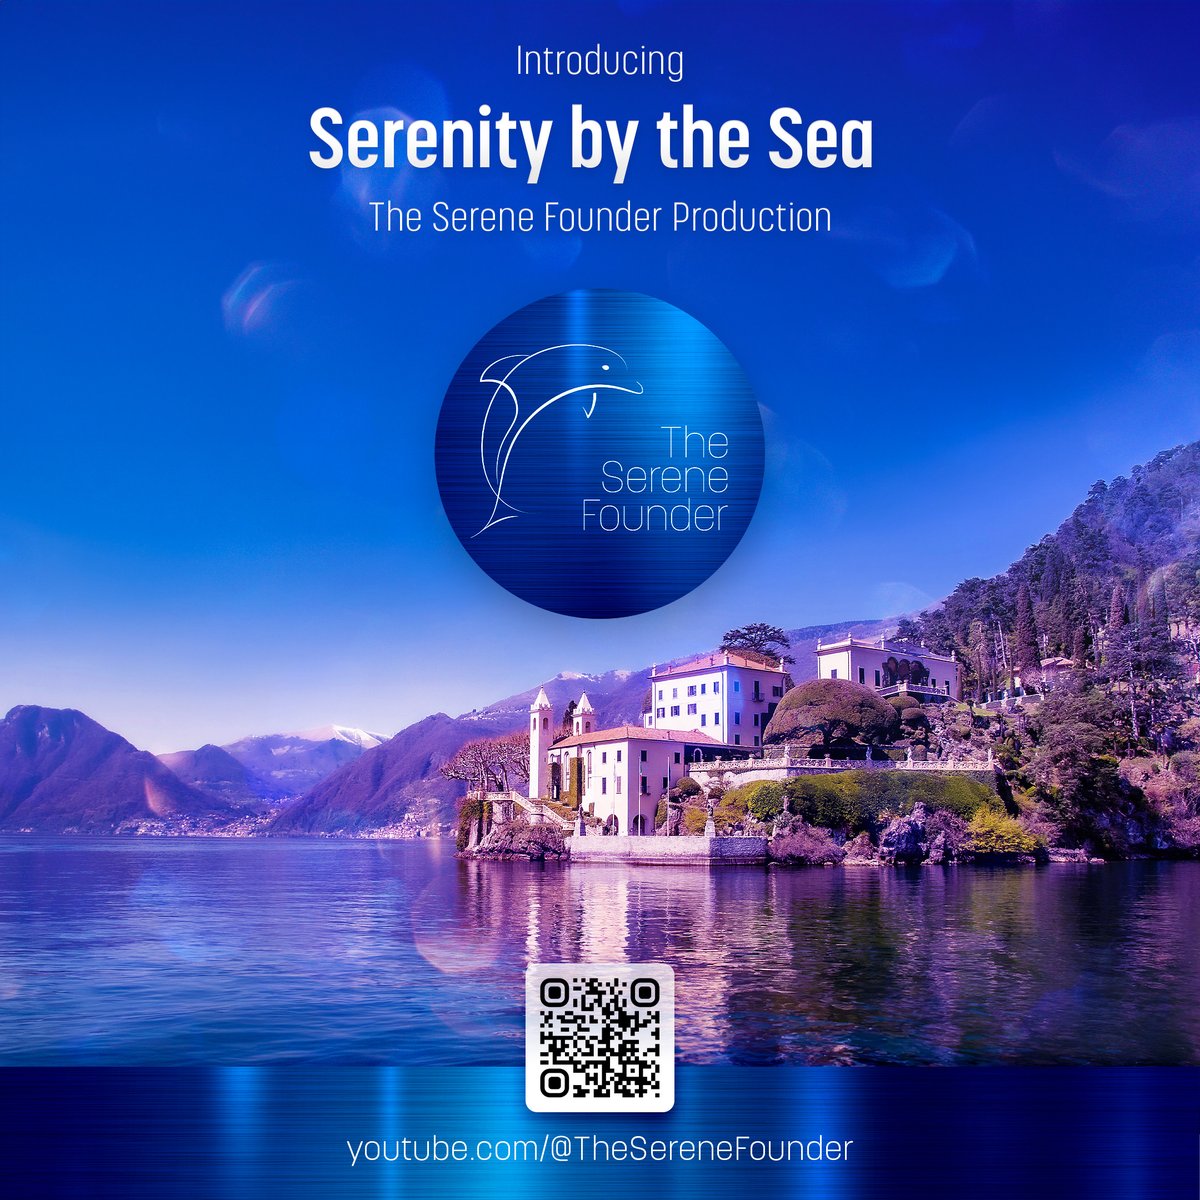 Join #TheSereneFounder as we immerse in the magical wonder of #serenity and #inspiration #soundscape. Invite #abundance and #expansion through sustained thoughts of #flow and #creativity. Let’s #thrive together youtu.be/saPcvVoqZ8A #963hz